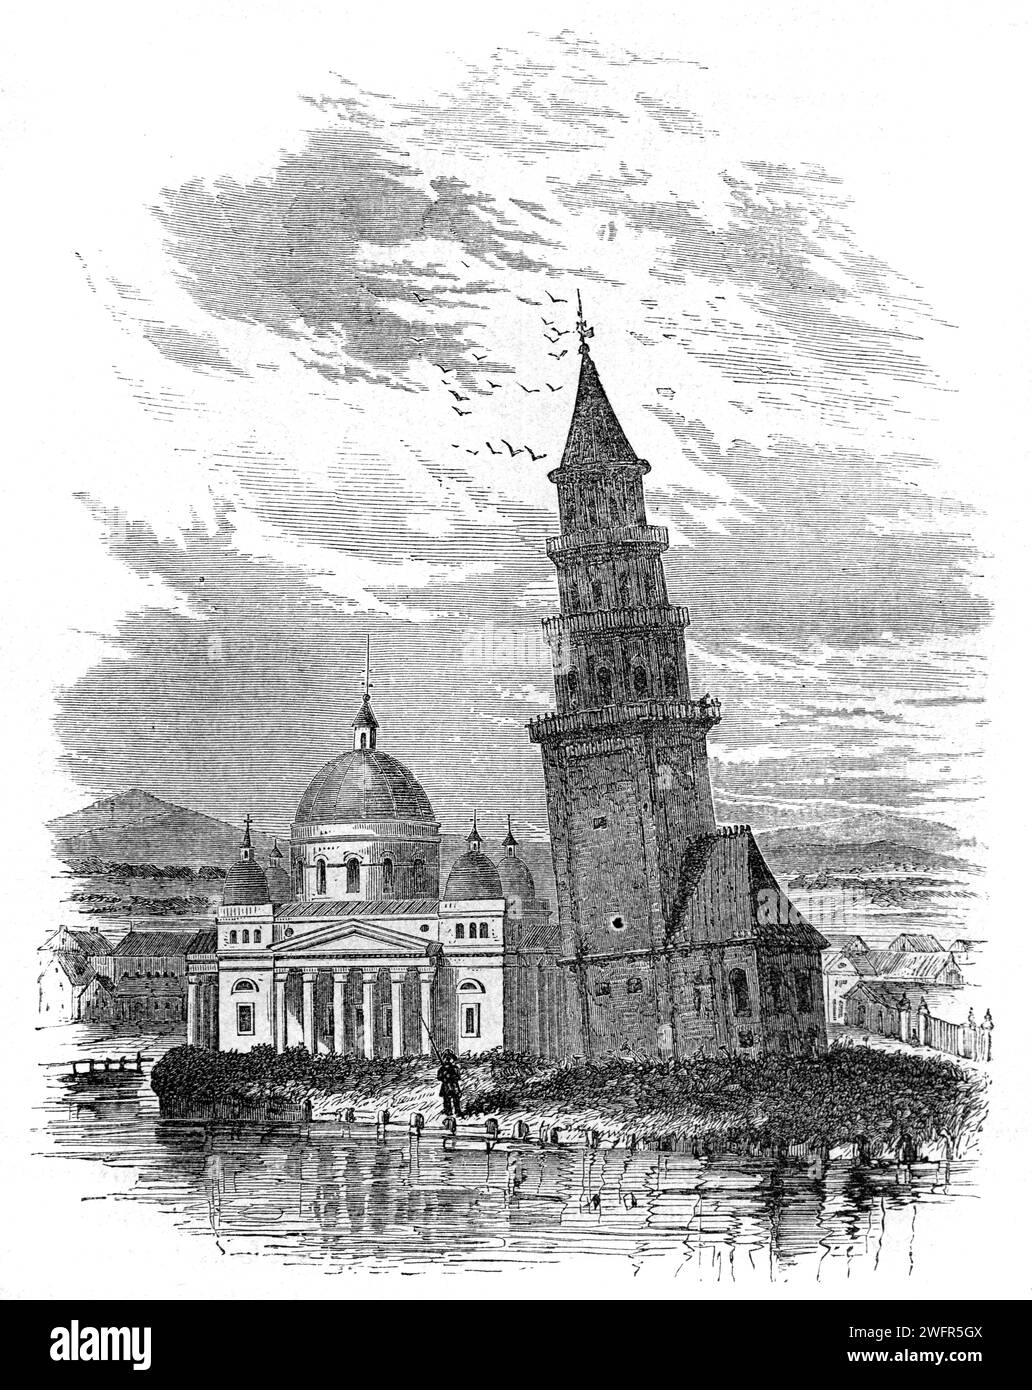 Leaning Tower of Nevyansk (c18th) with (to left) the Old Believers Church, on the Banks of the Neyva River, Sverdlovsk Oblast Russia. Vintage or Historic Engraving or Illustration 1863 Stock Photo